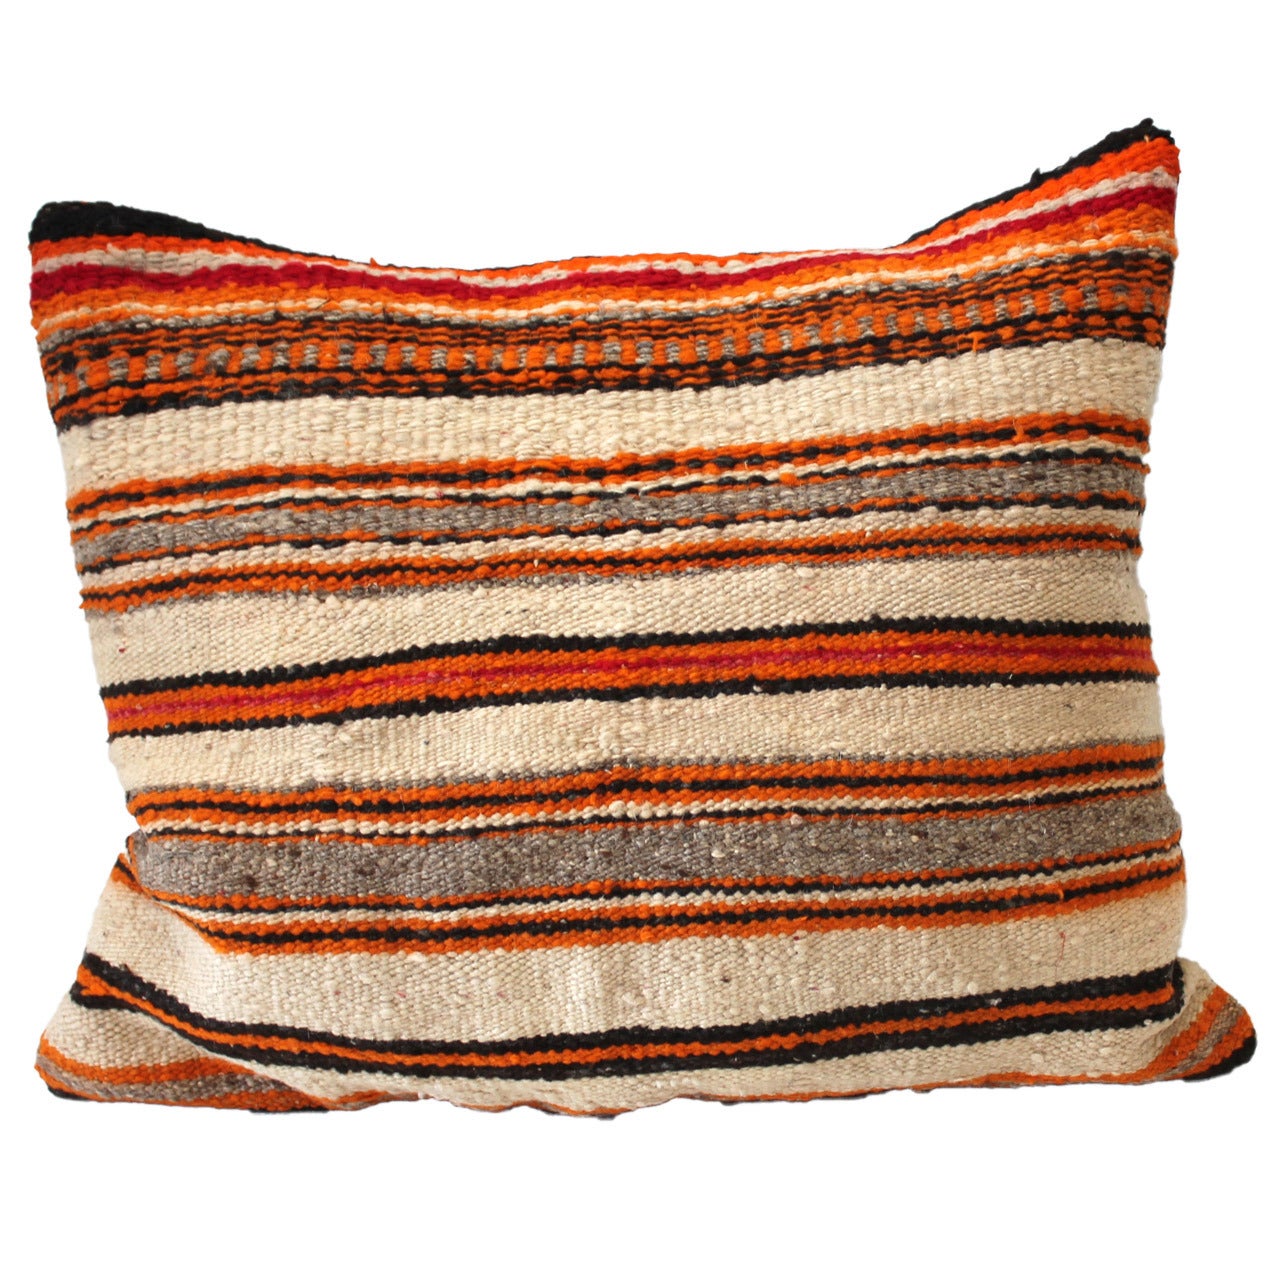 Early Navajo Indian Saddle Blanket Pillow